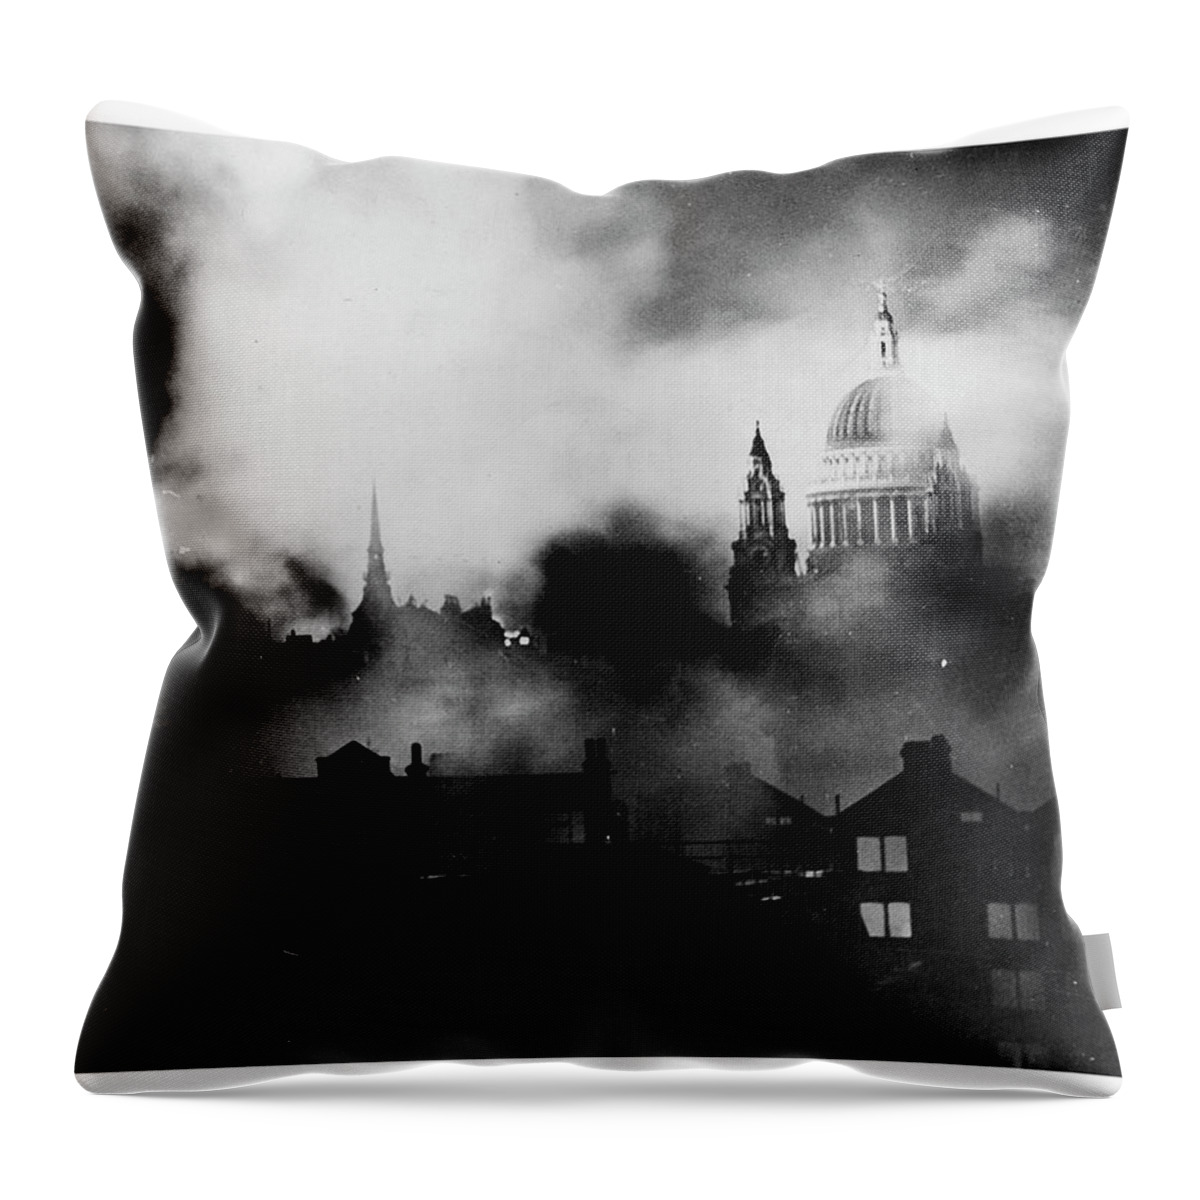 London Throw Pillow featuring the photograph London Blitz by Chris Smith